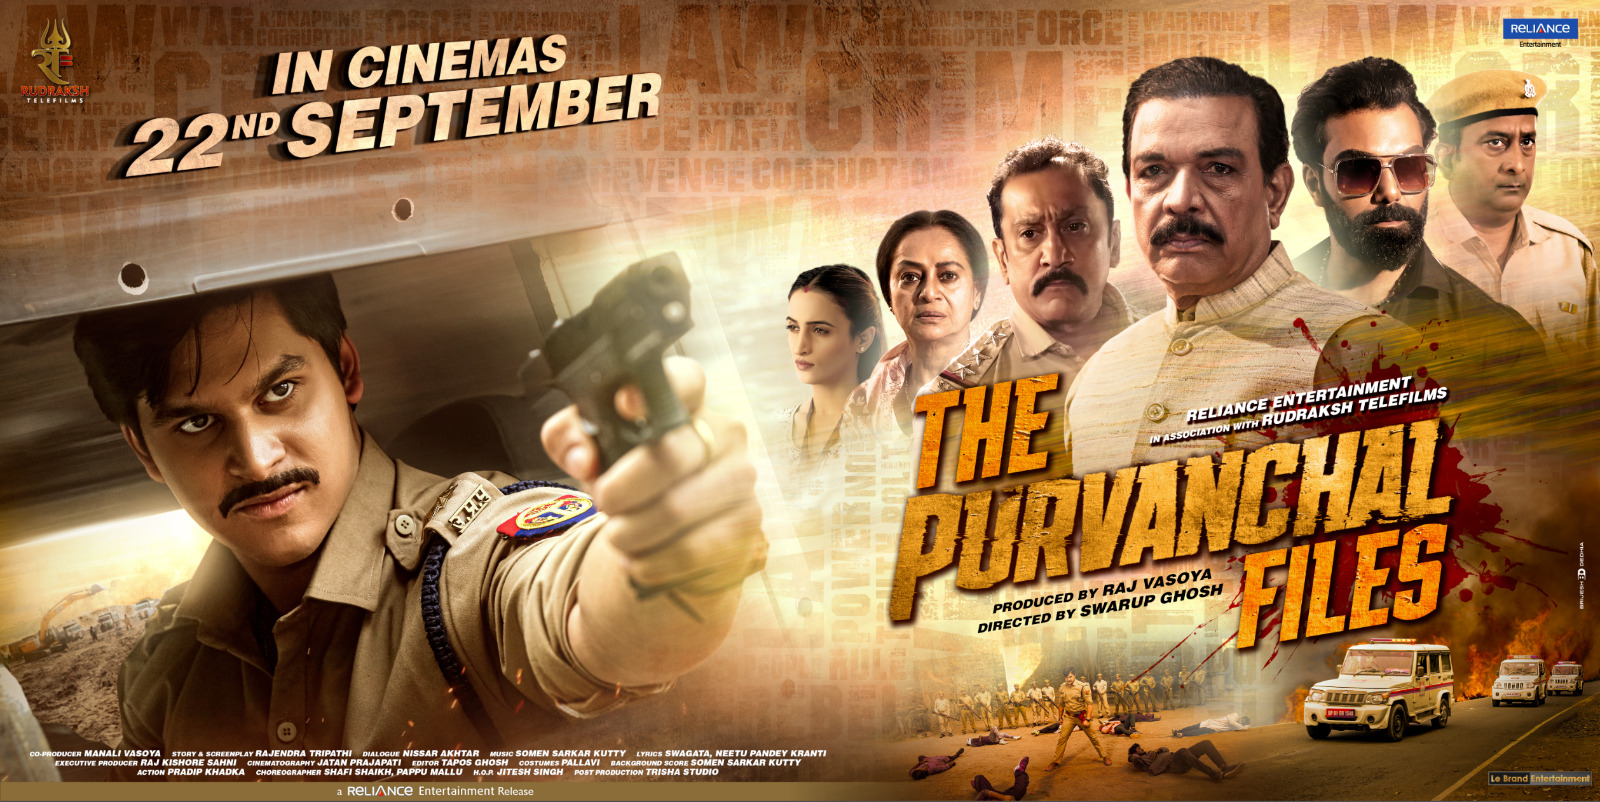 “The Purvanchal Files” explores the  underbelly of Eastern Uttar Pradesh, poster out!